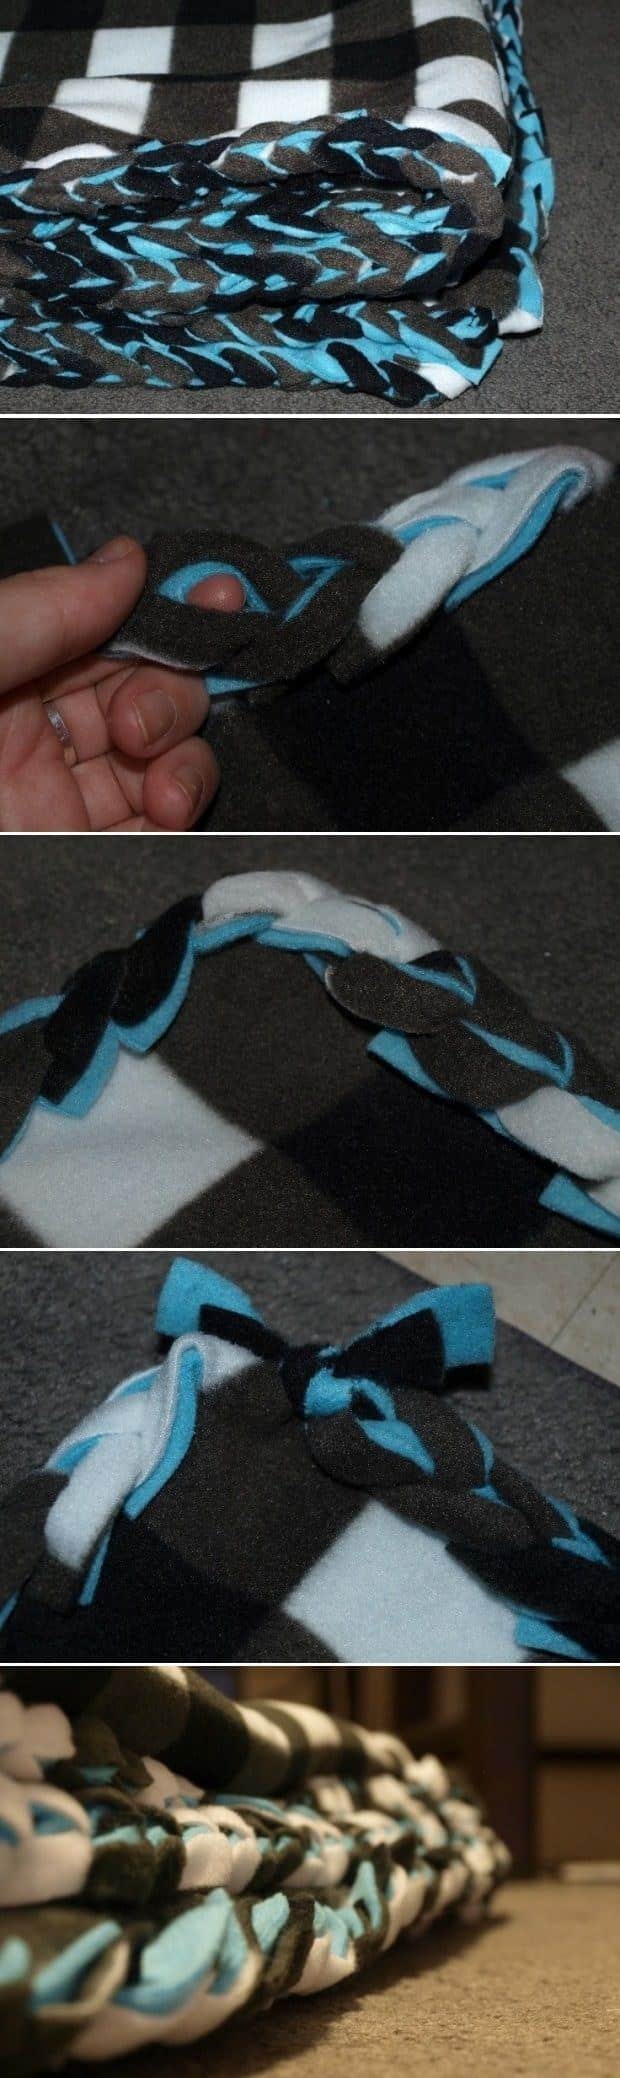 Braid the edges of a tie blanket instead of knotting them for a neater land less bulky look.